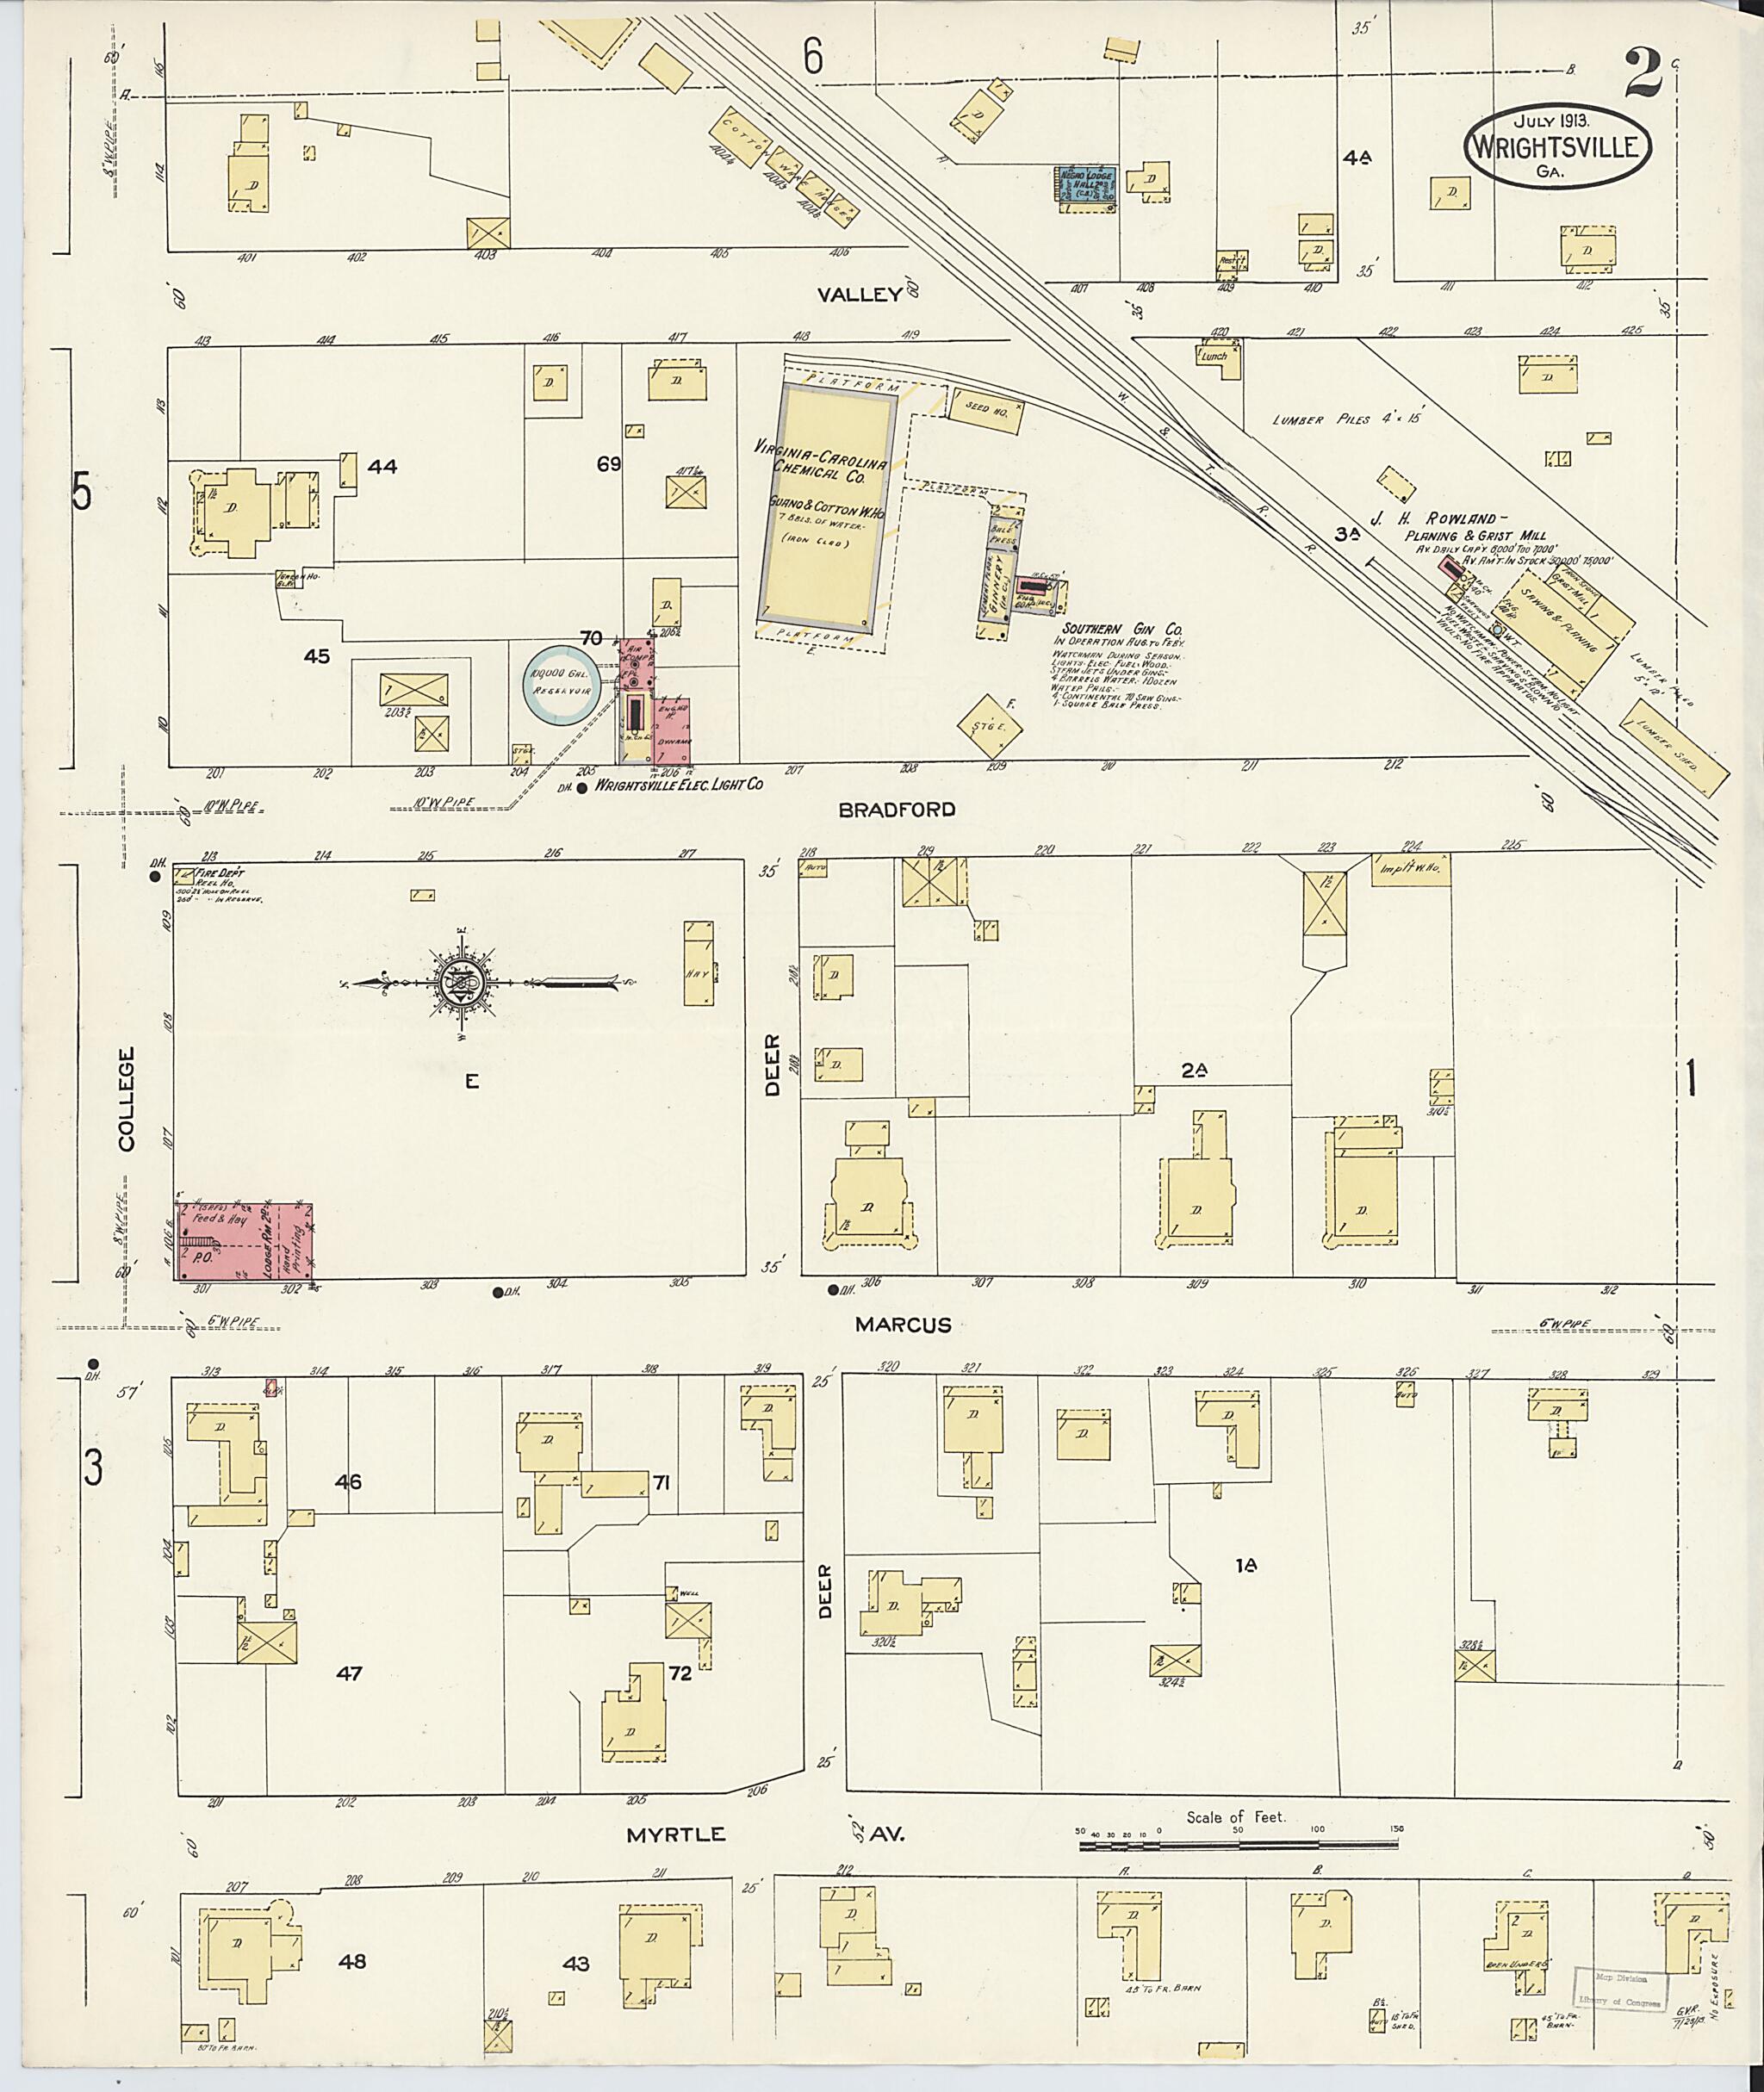 This old map of Wrightsville, Johnson County, Georgia was created by Sanborn Map Company in 1913